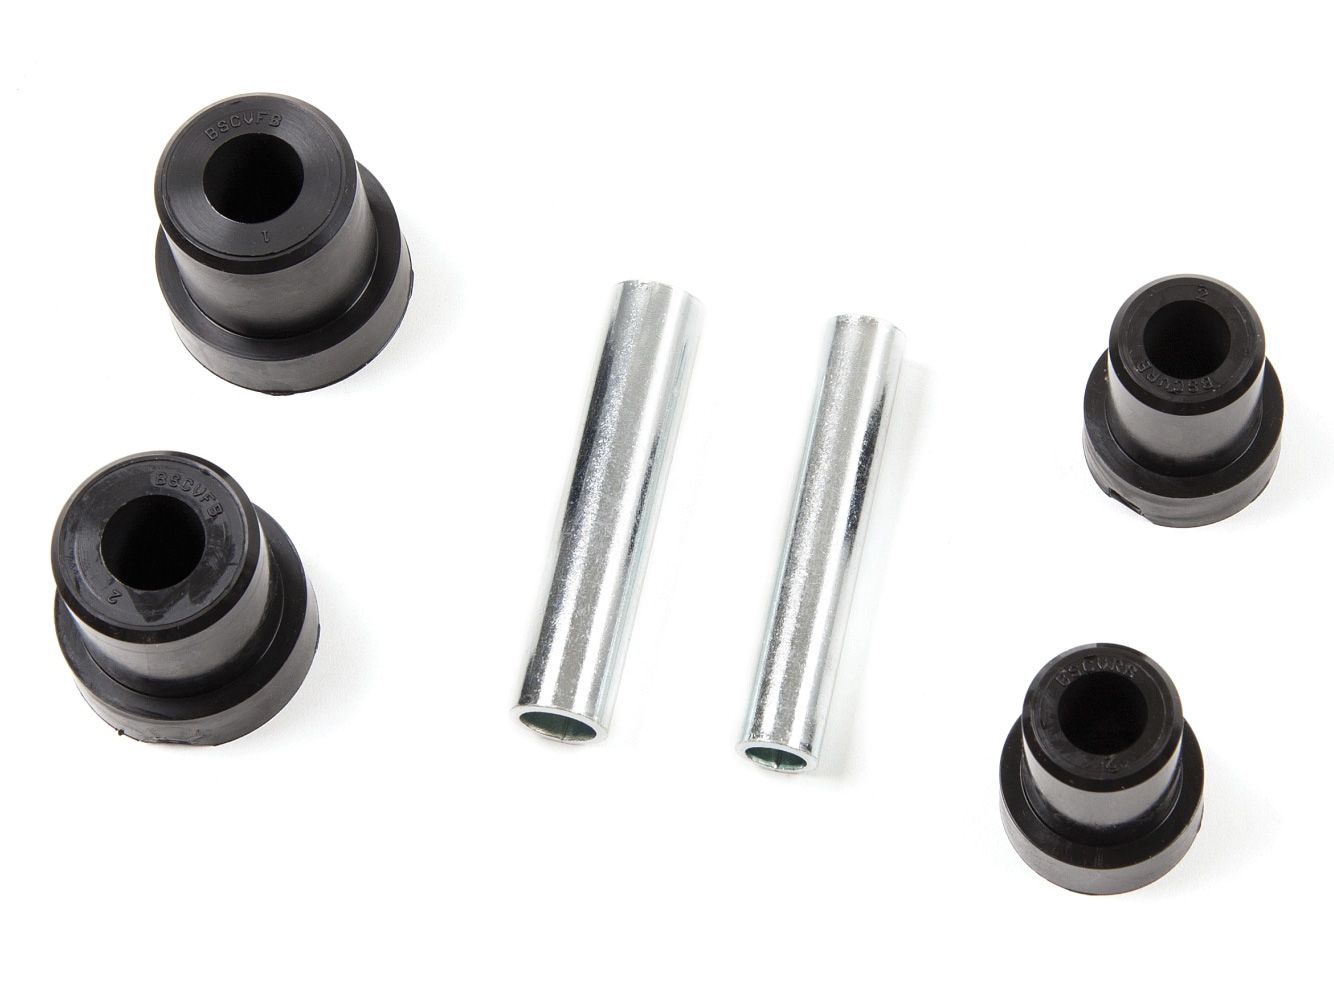 Jimmy & Suburban 1/2, 3/4 ton 1988-1991 GMC 4WD Front Leaf Spring Bushing Kit by Zone Off-Road